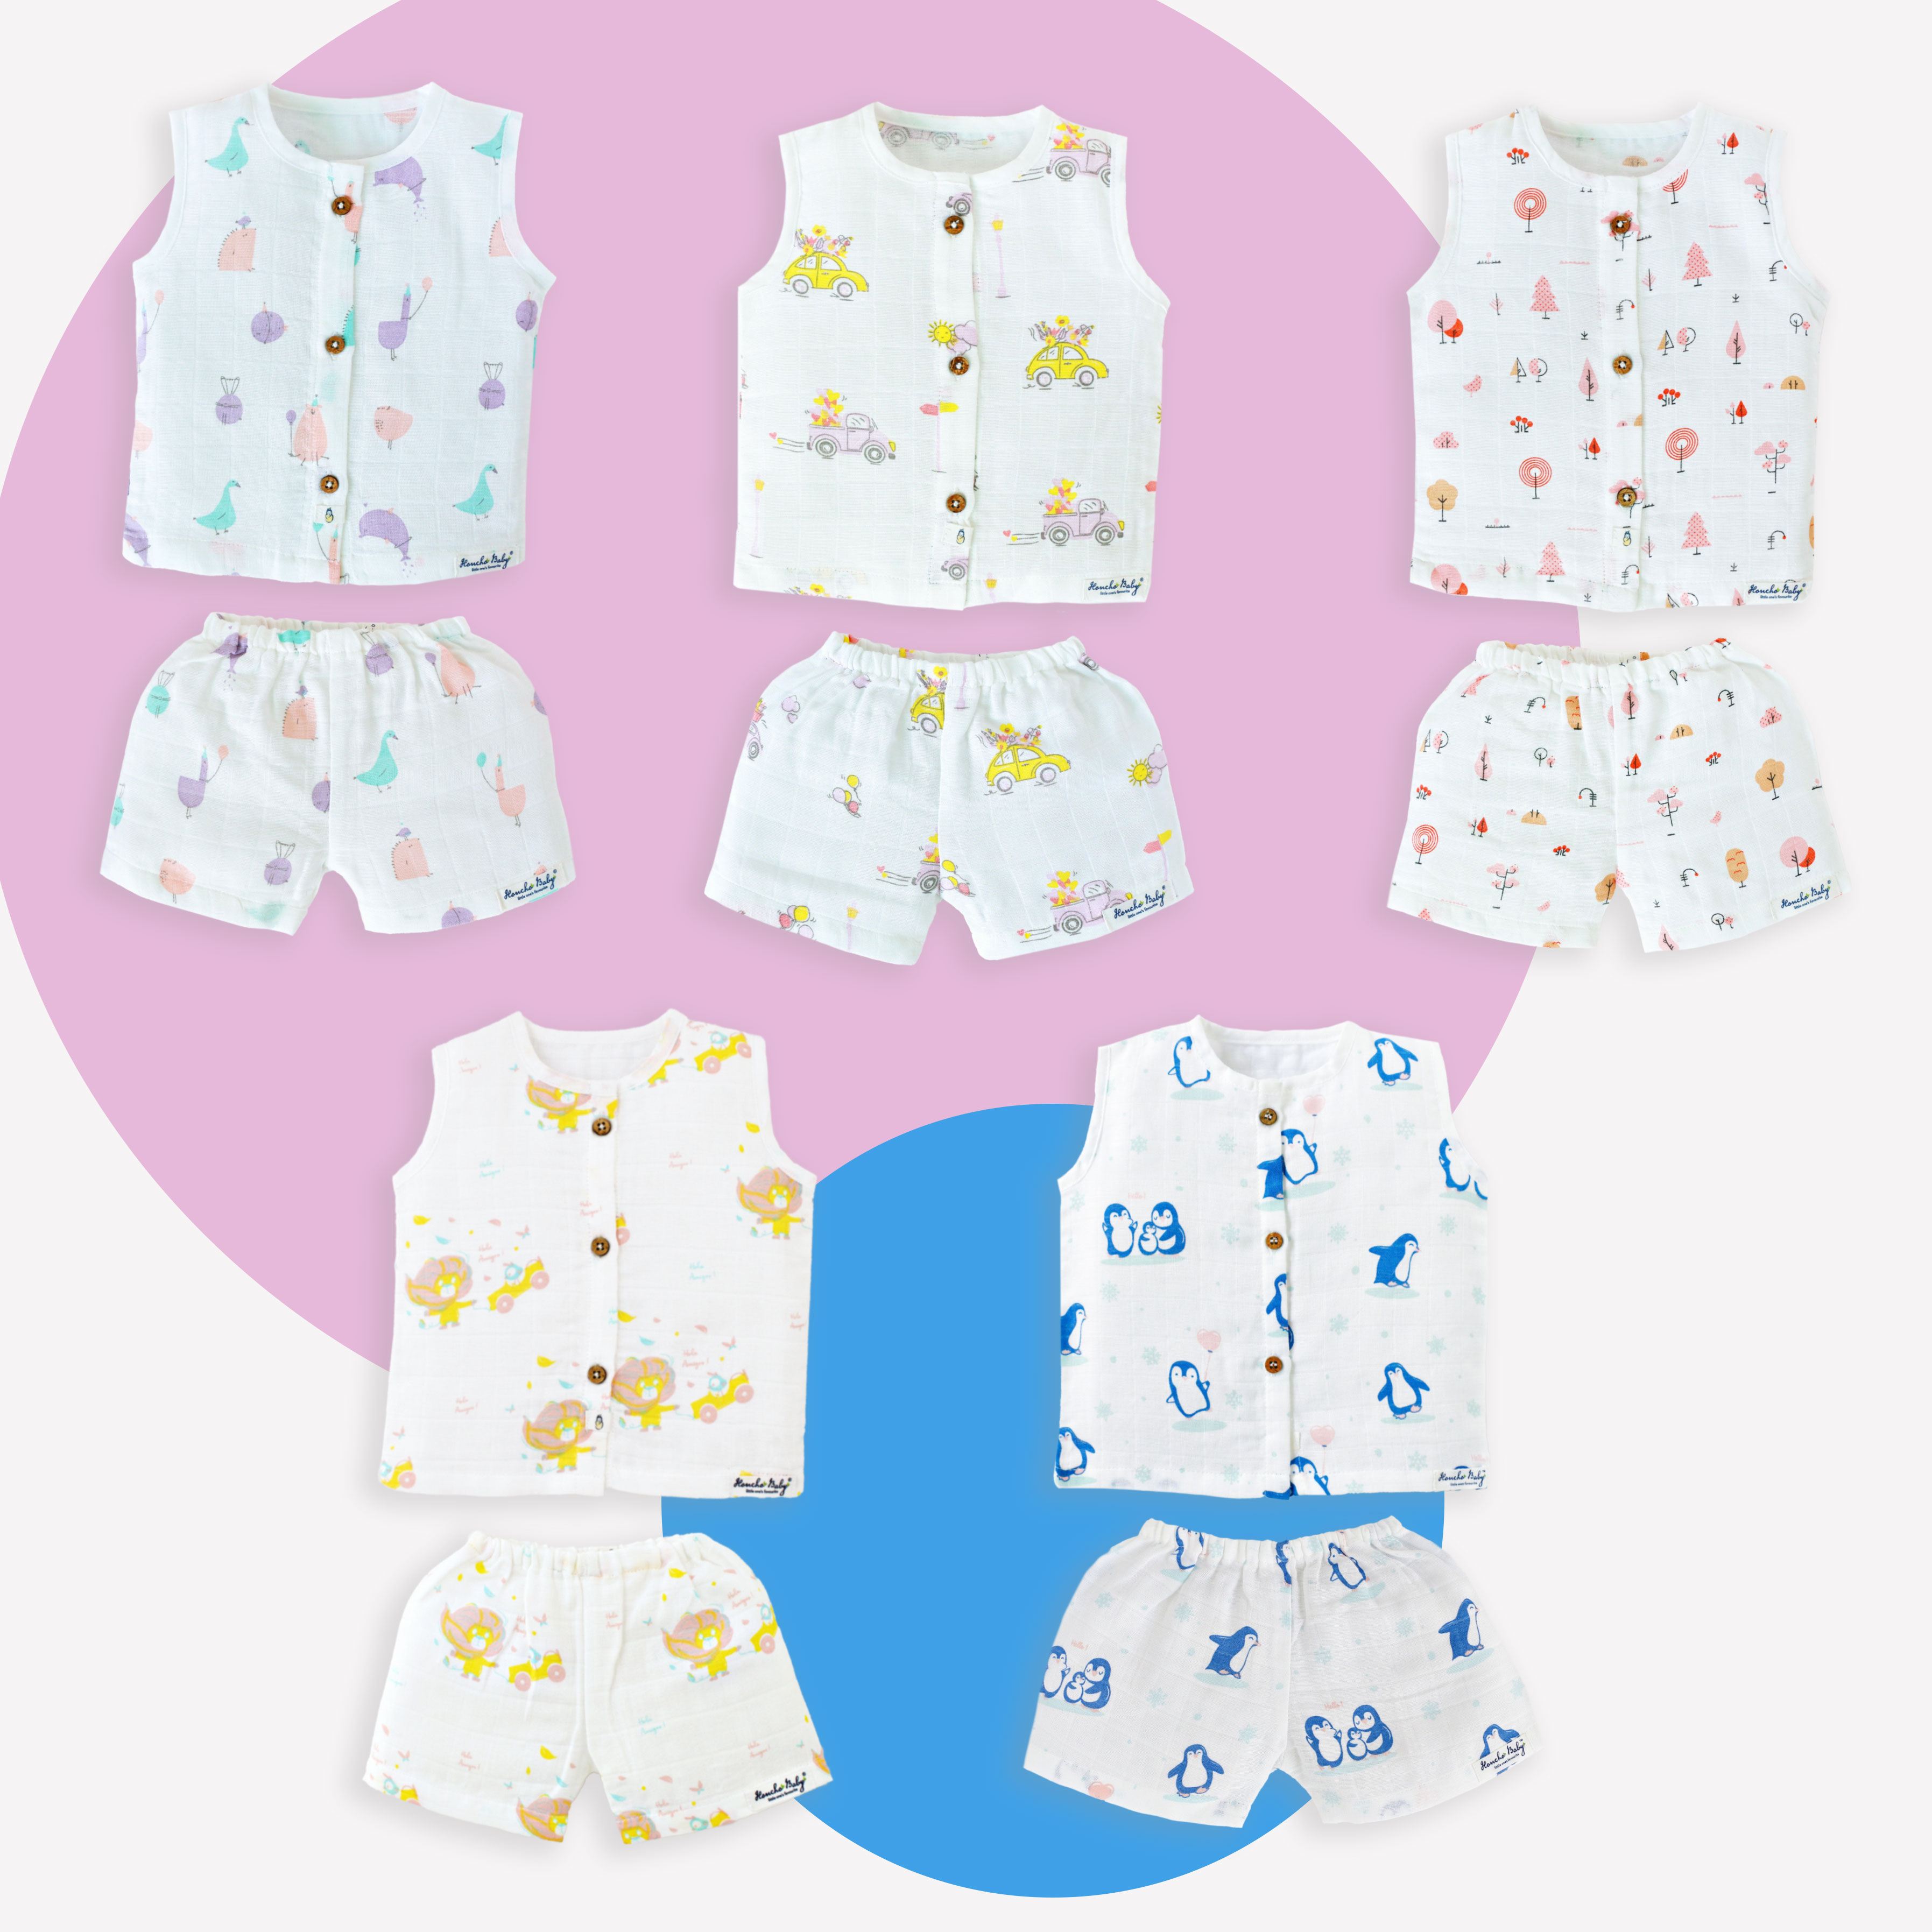 Muslin Unisex Daily Wear (Jabals - 5 & Shorts - 5) new born to 3 years -Assorted 10 Pack NEW